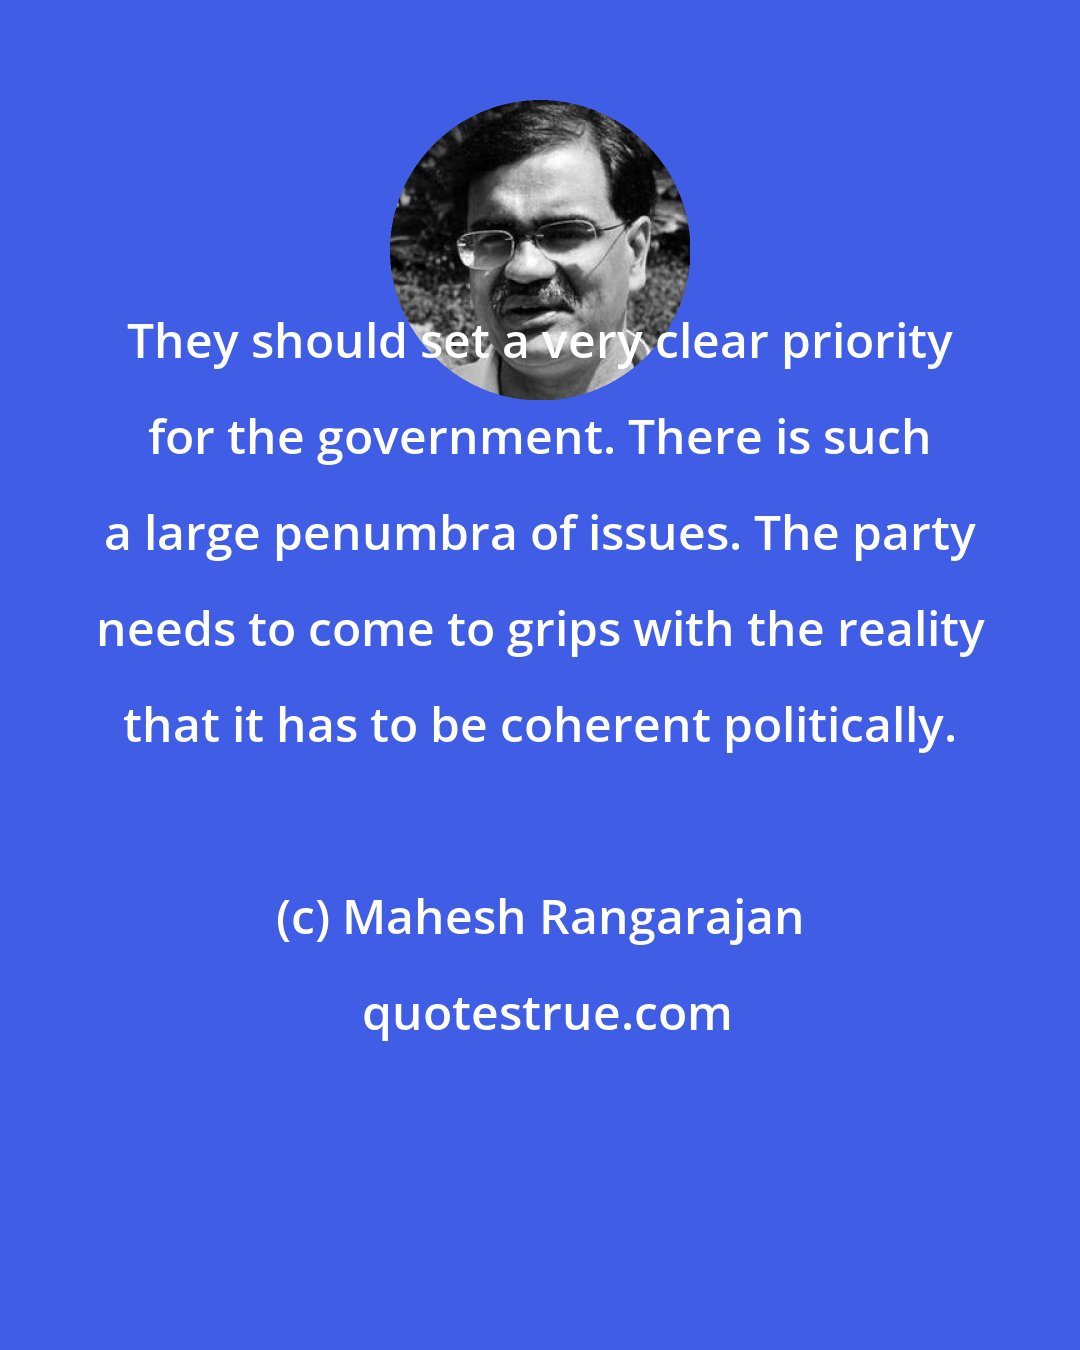 Mahesh Rangarajan: They should set a very clear priority for the government. There is such a large penumbra of issues. The party needs to come to grips with the reality that it has to be coherent politically.